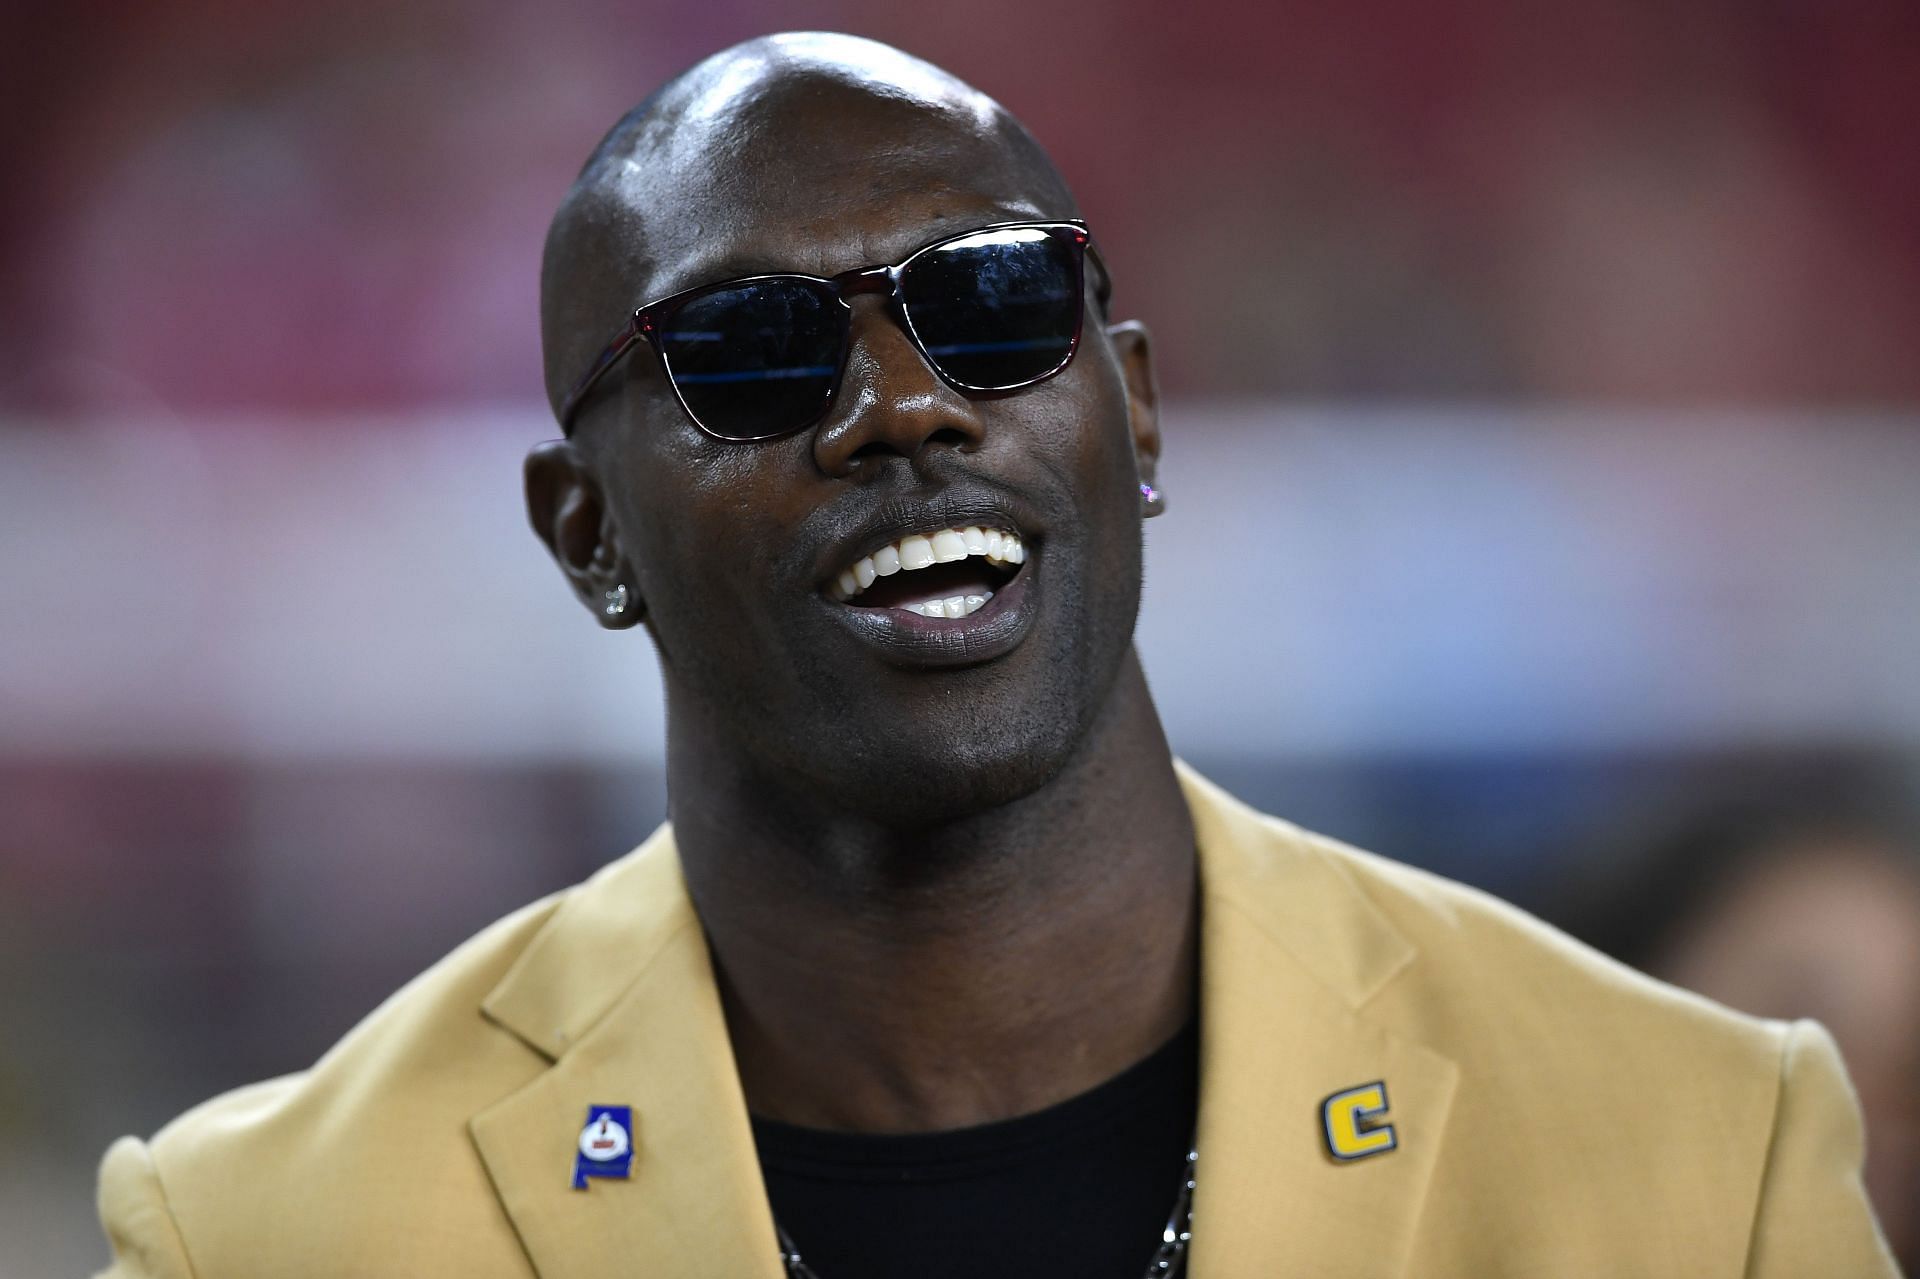 Terrell Owens was a star in the league, despite his antics